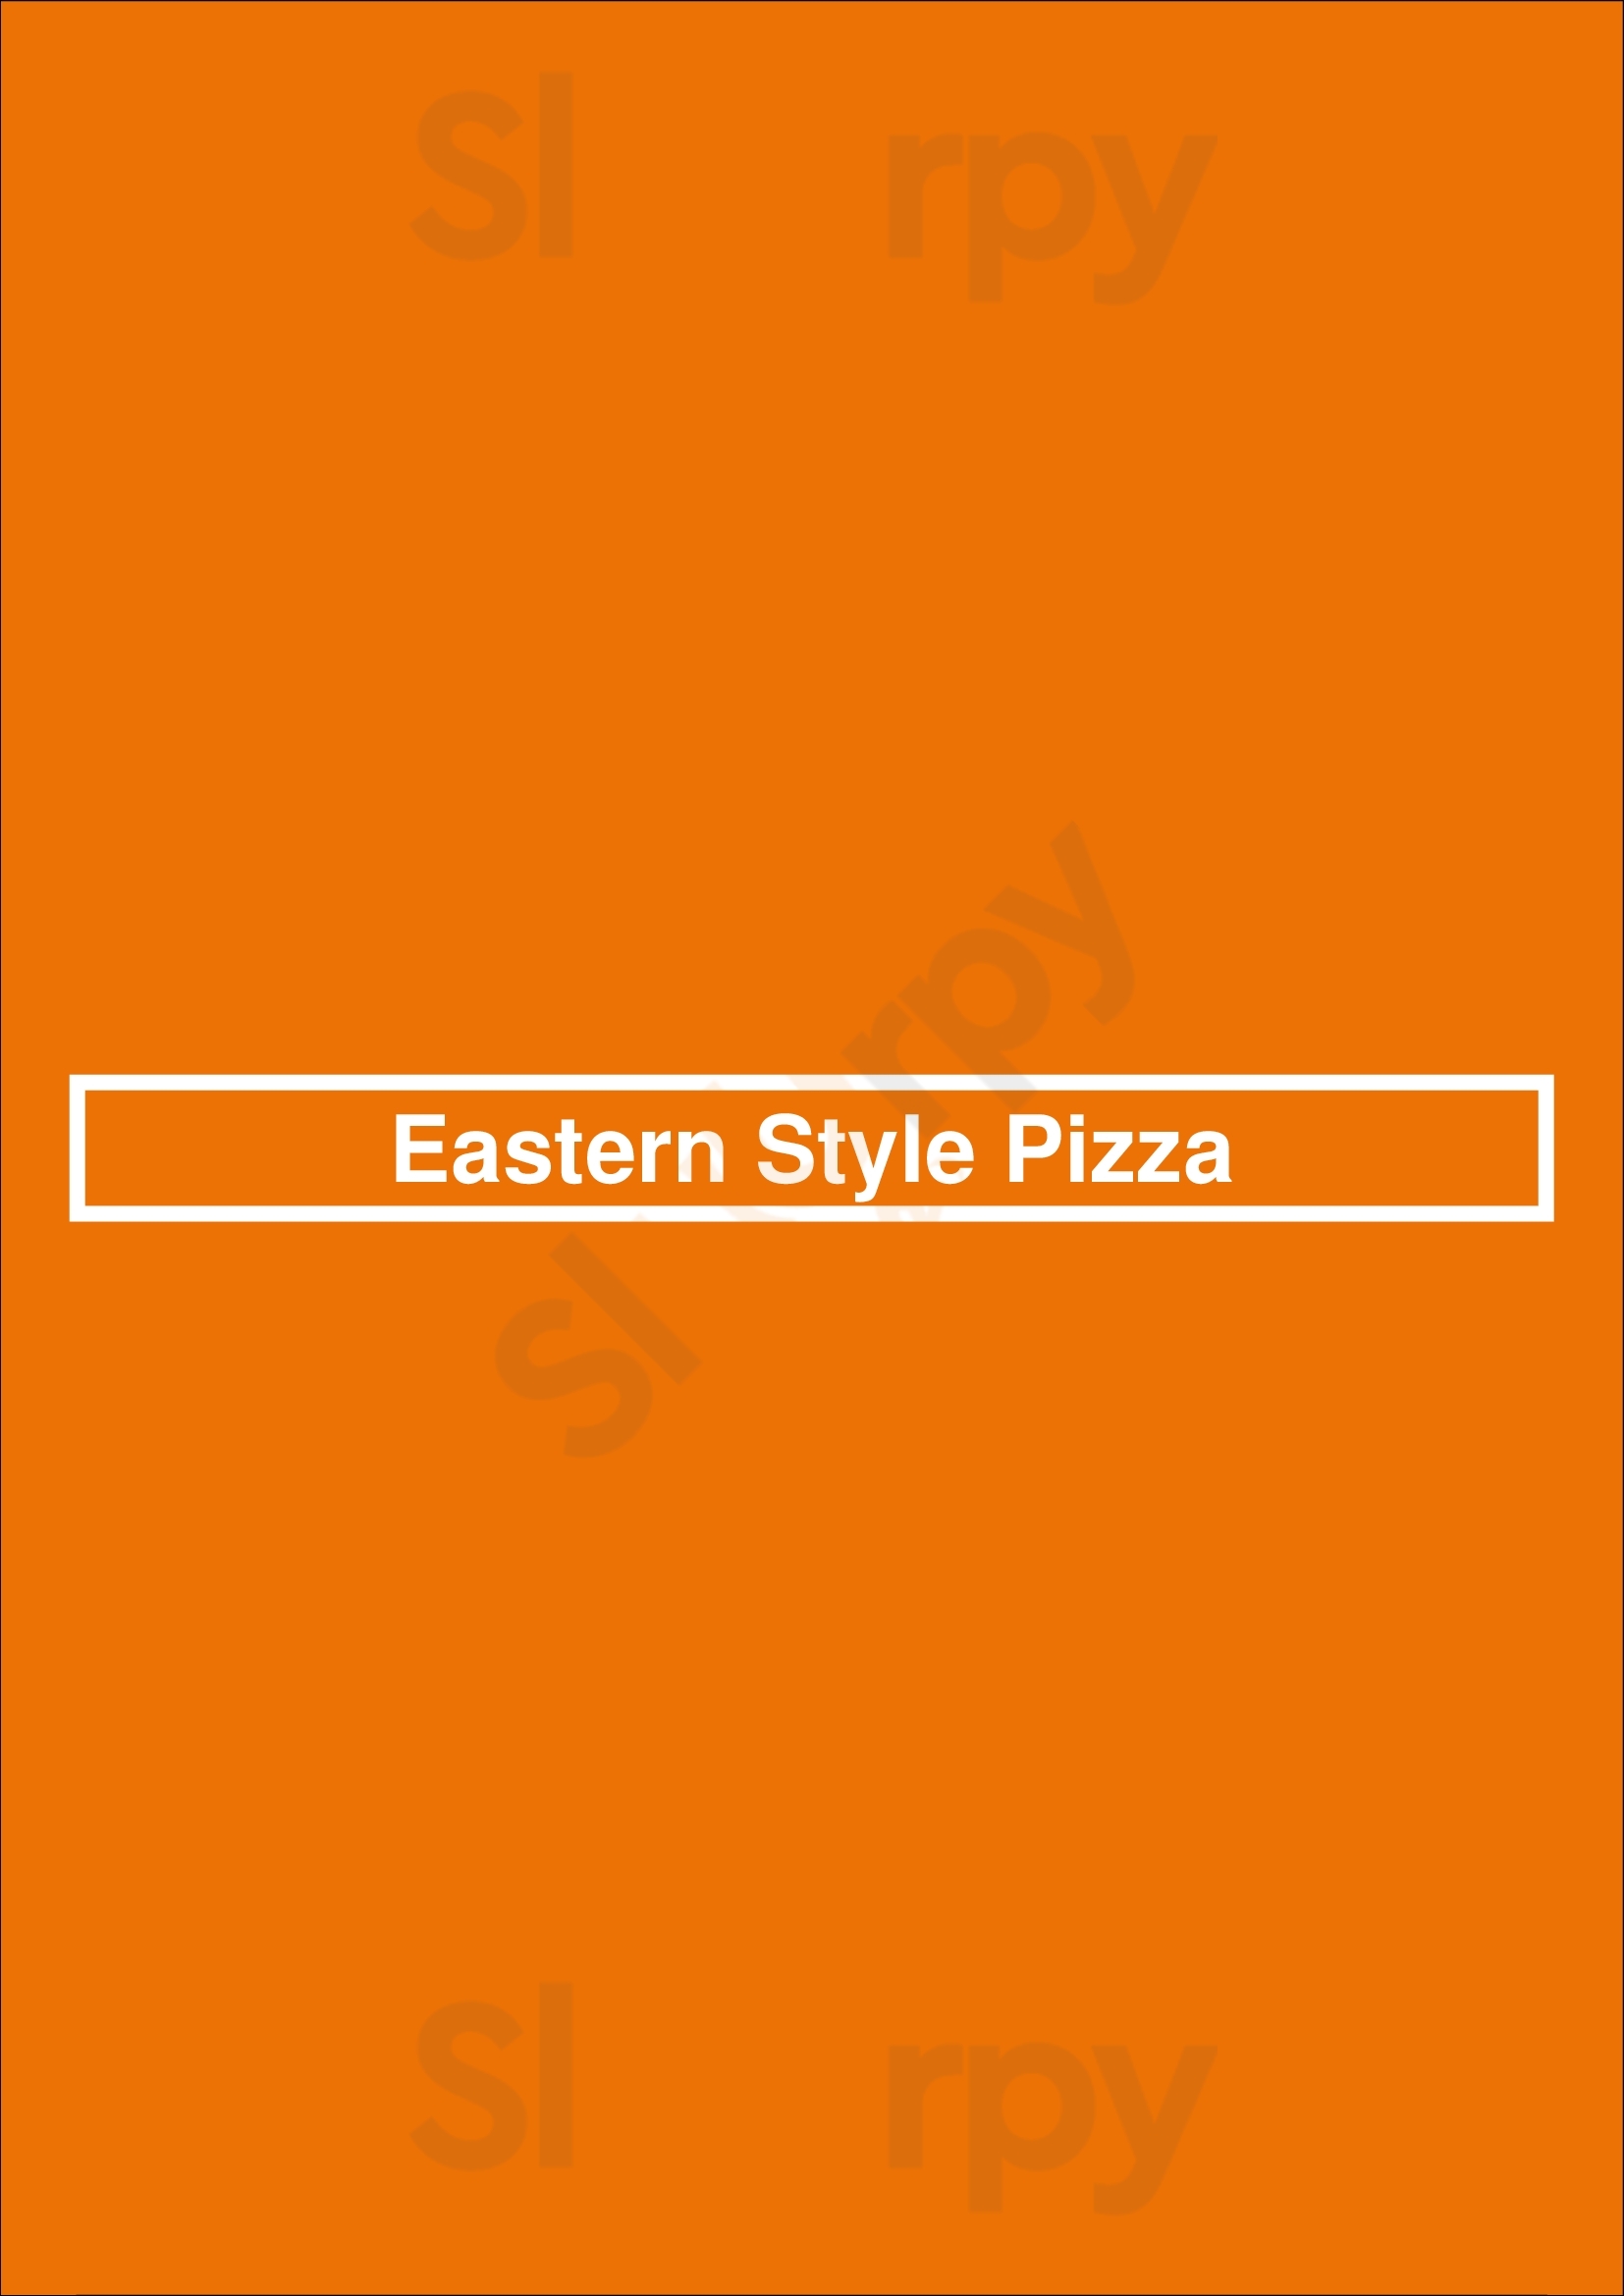 Eastern Style Pizza Chicago Menu - 1